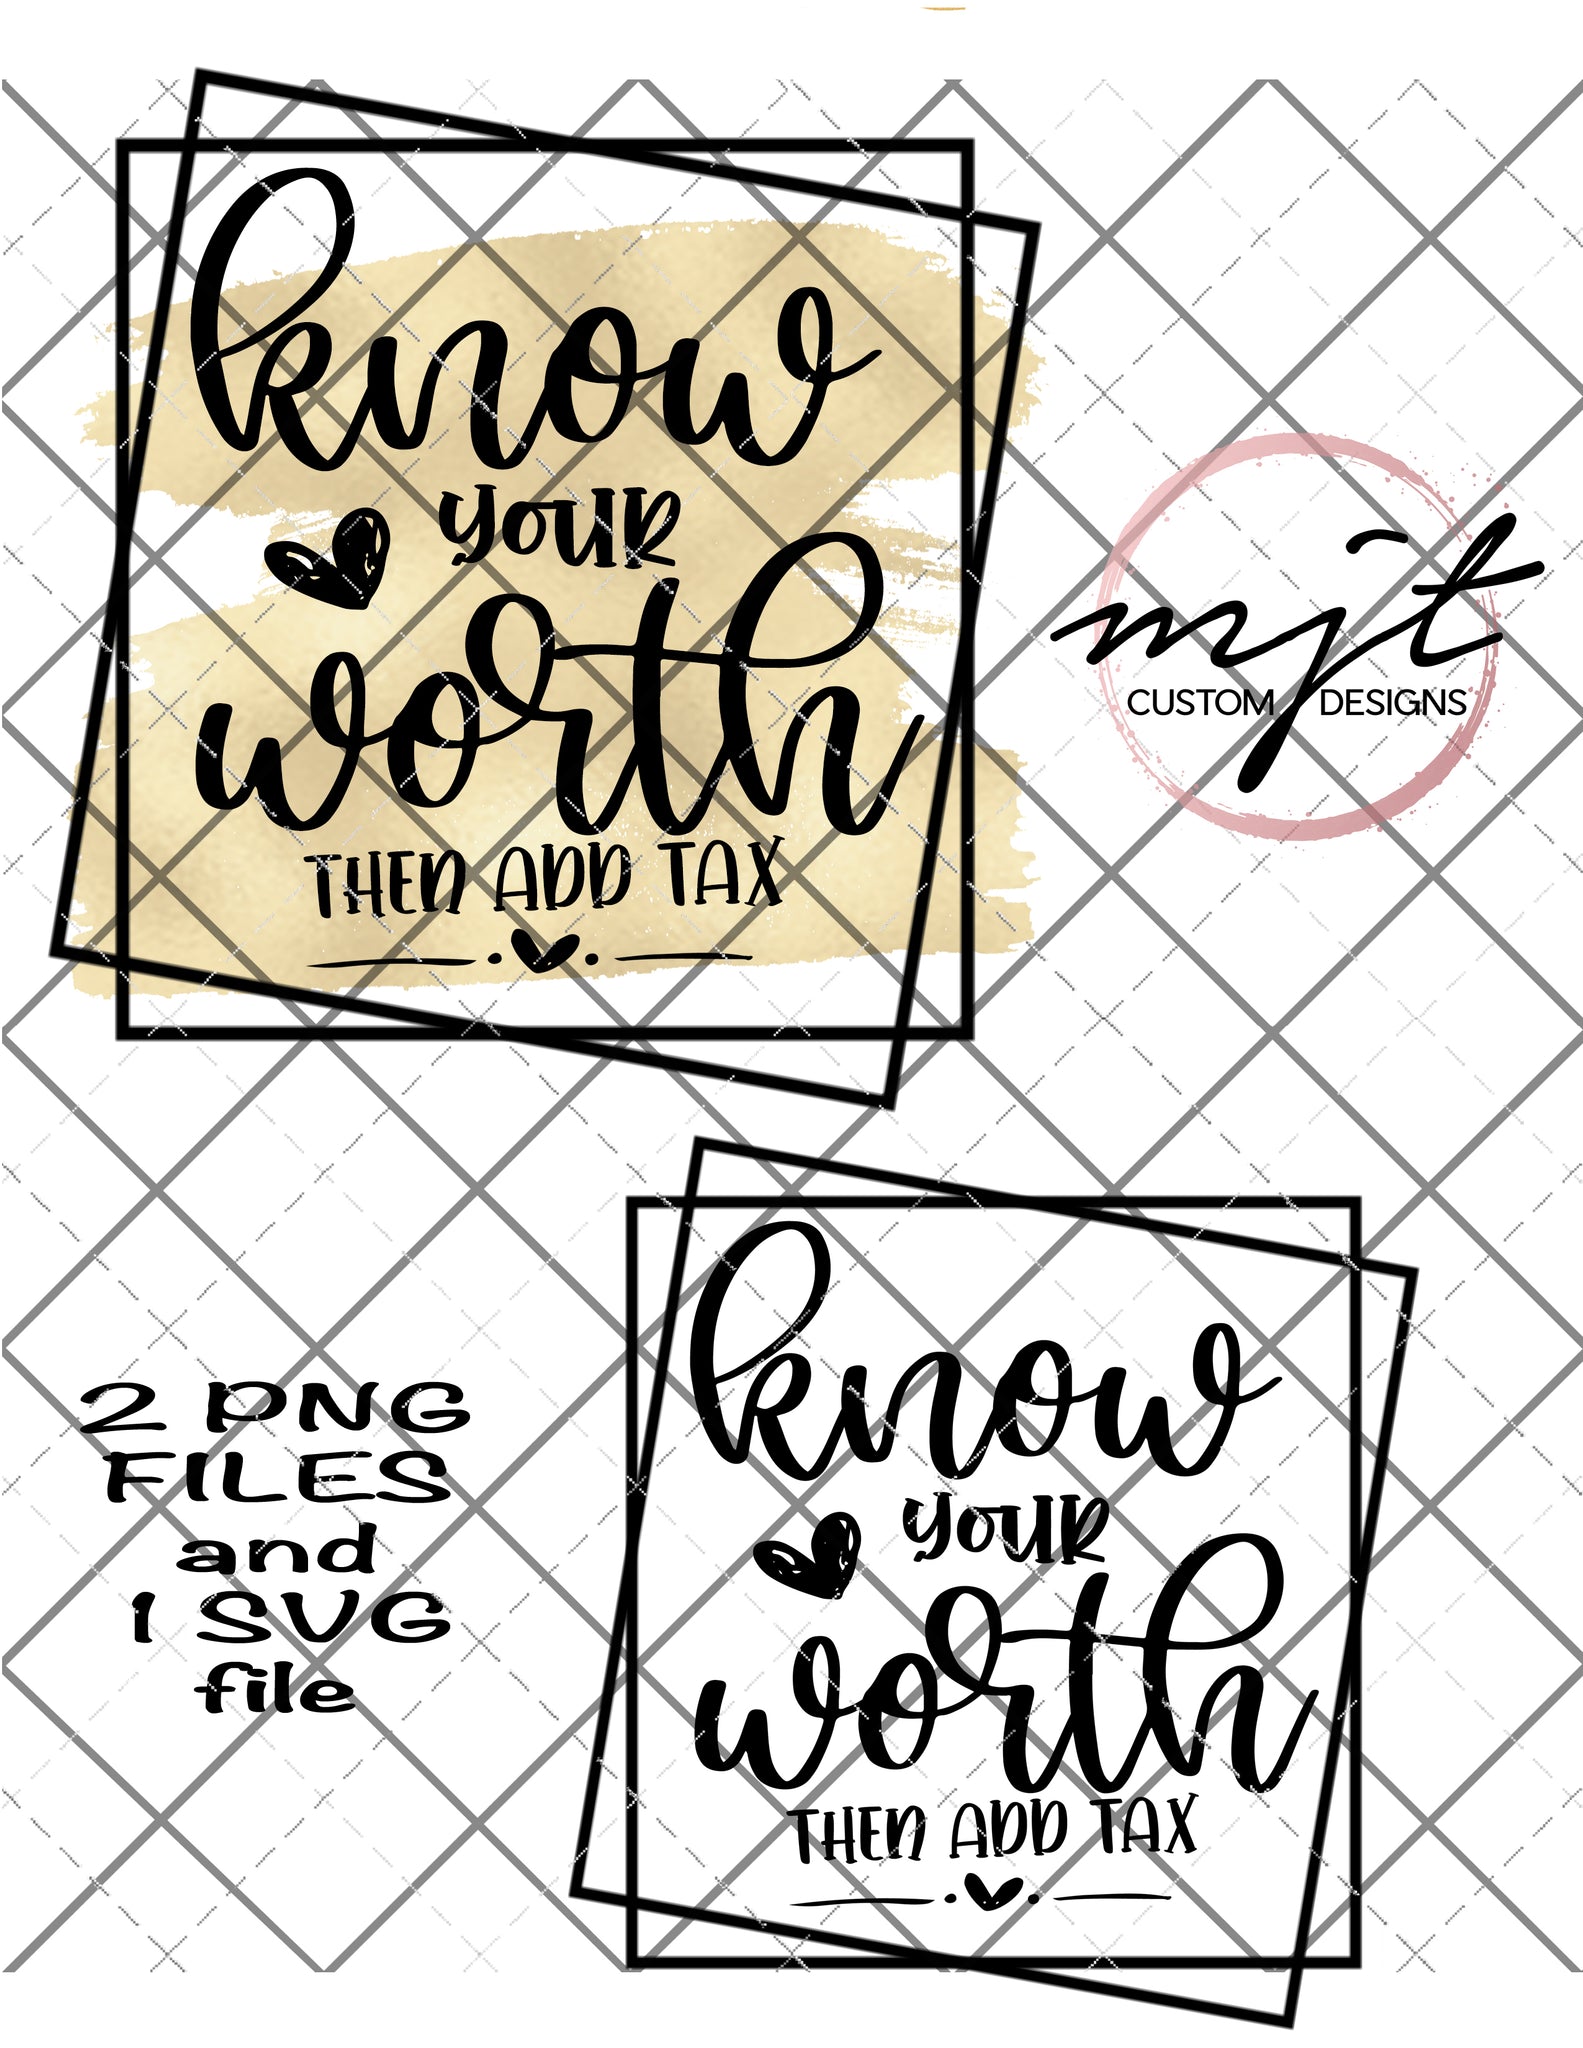 Know your worth-  PNG and SVG Files